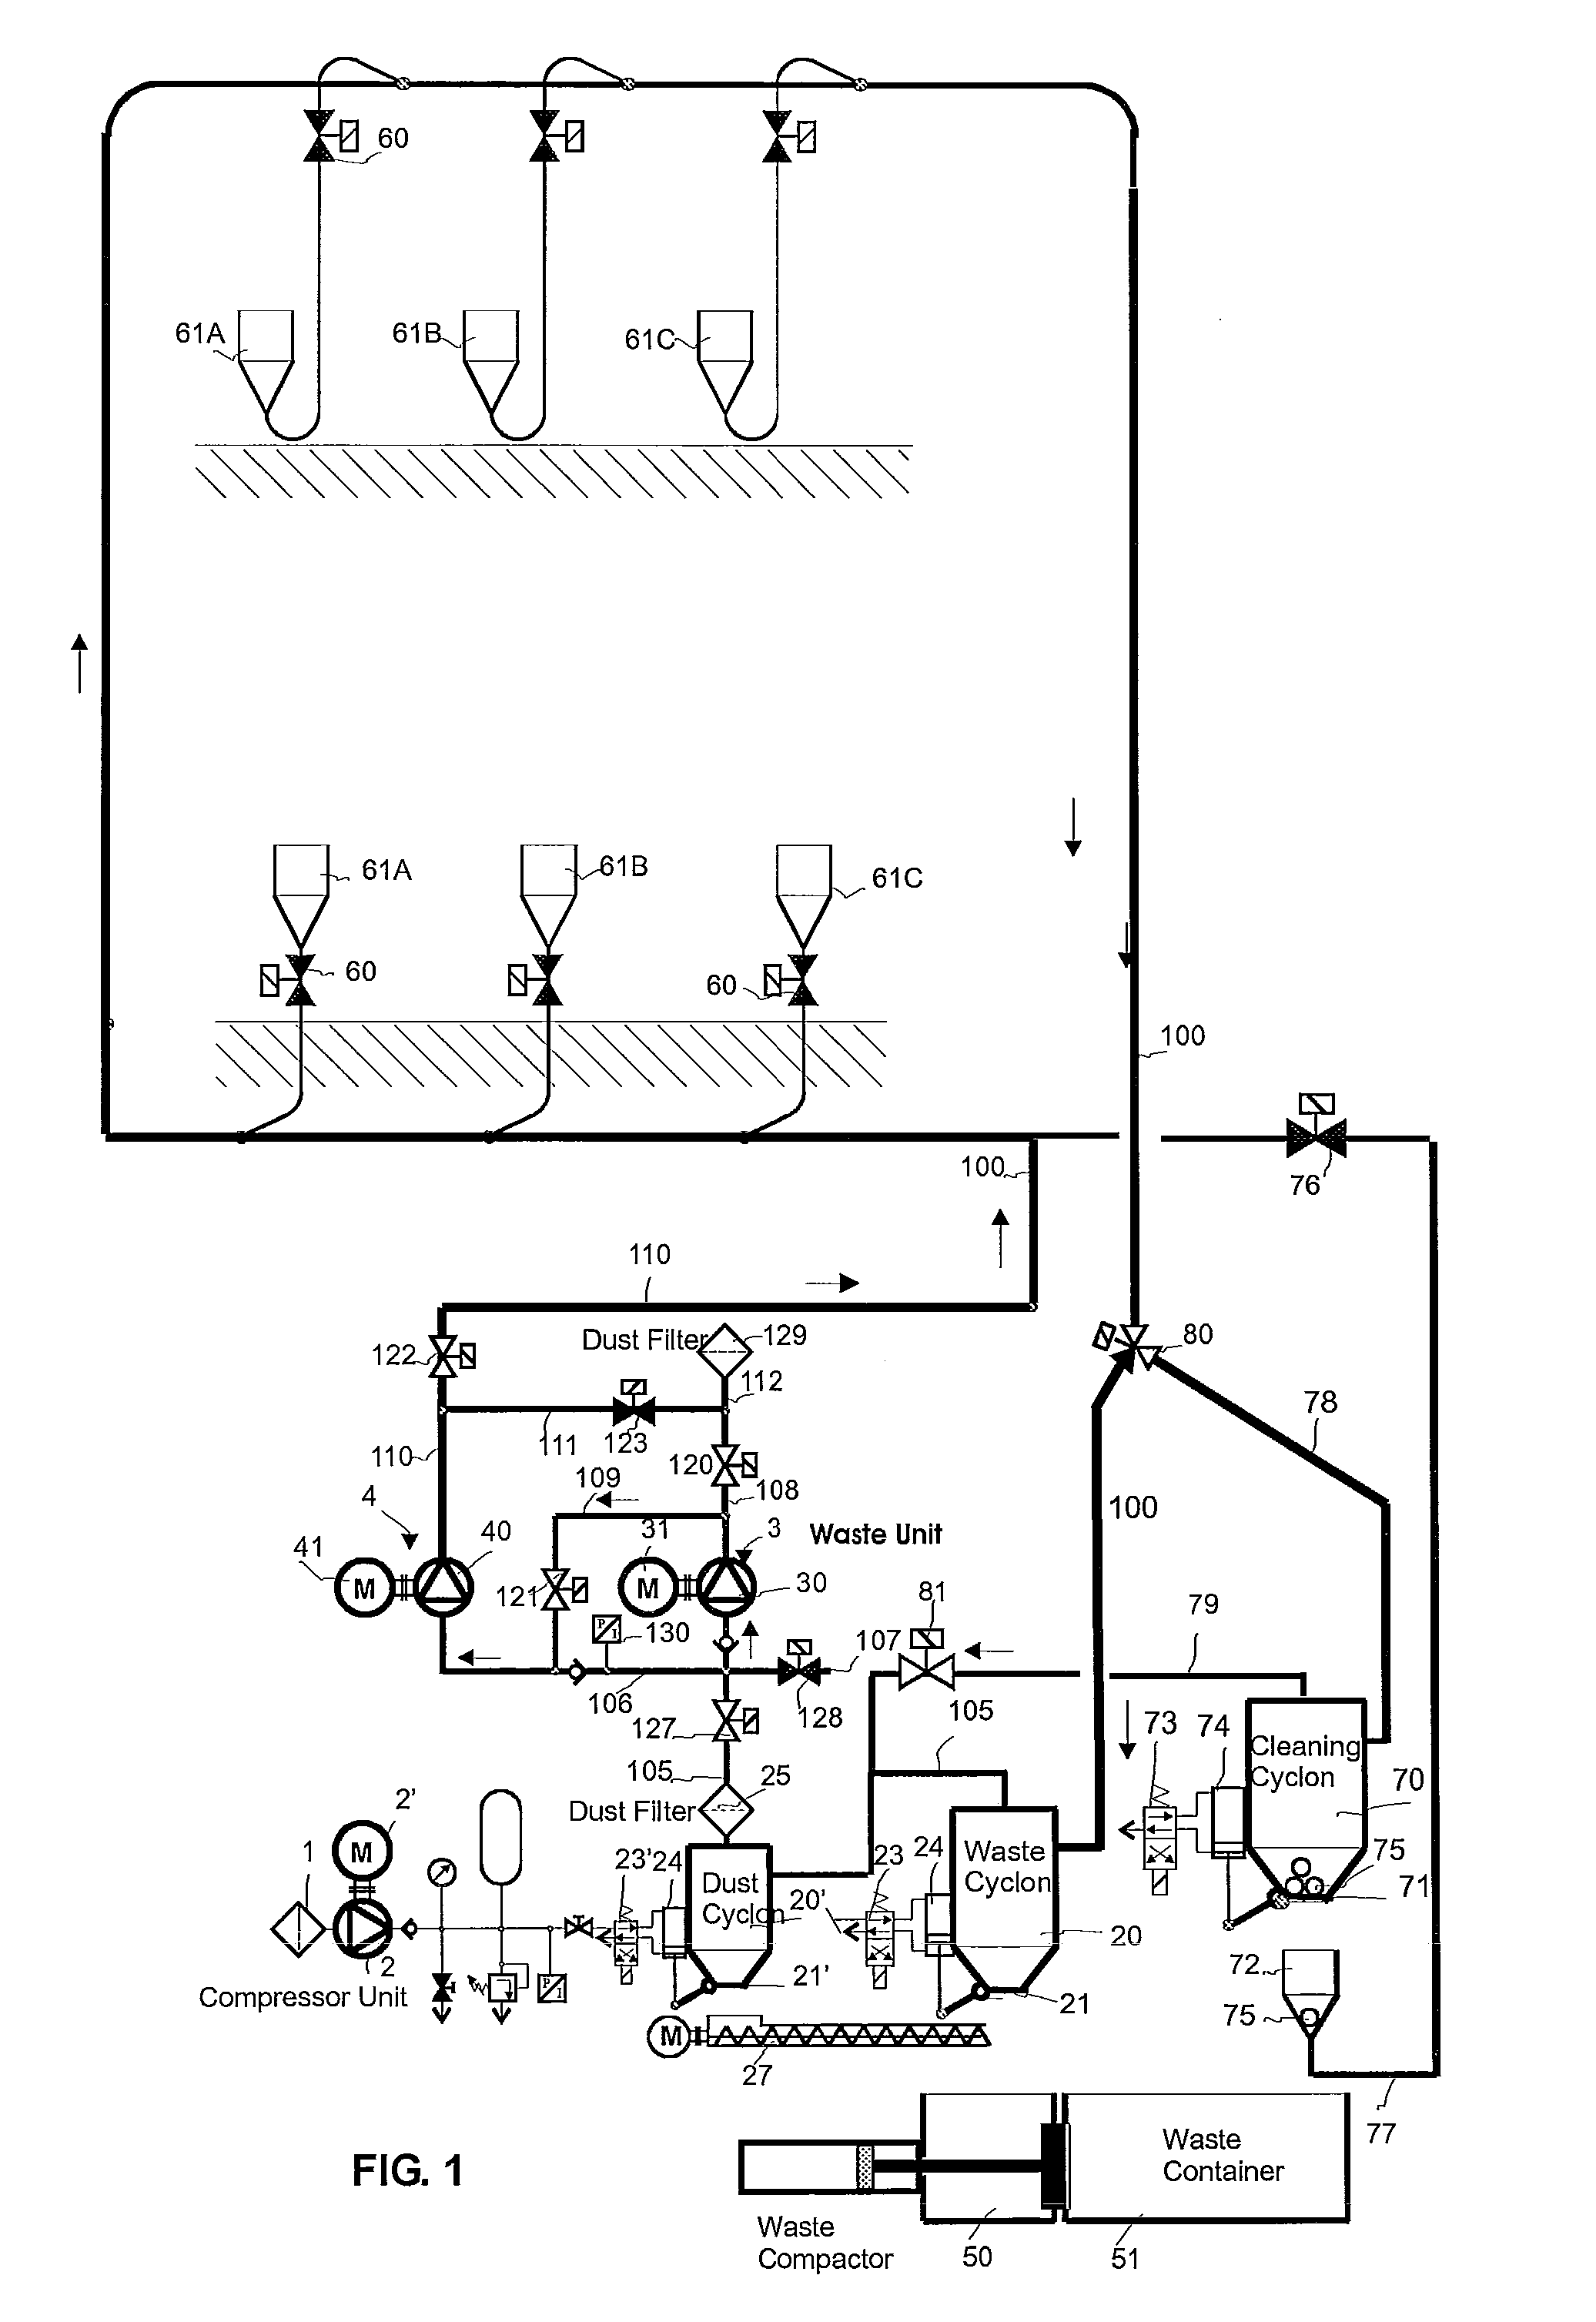 Method and apparatus in pneumatic material conveying system